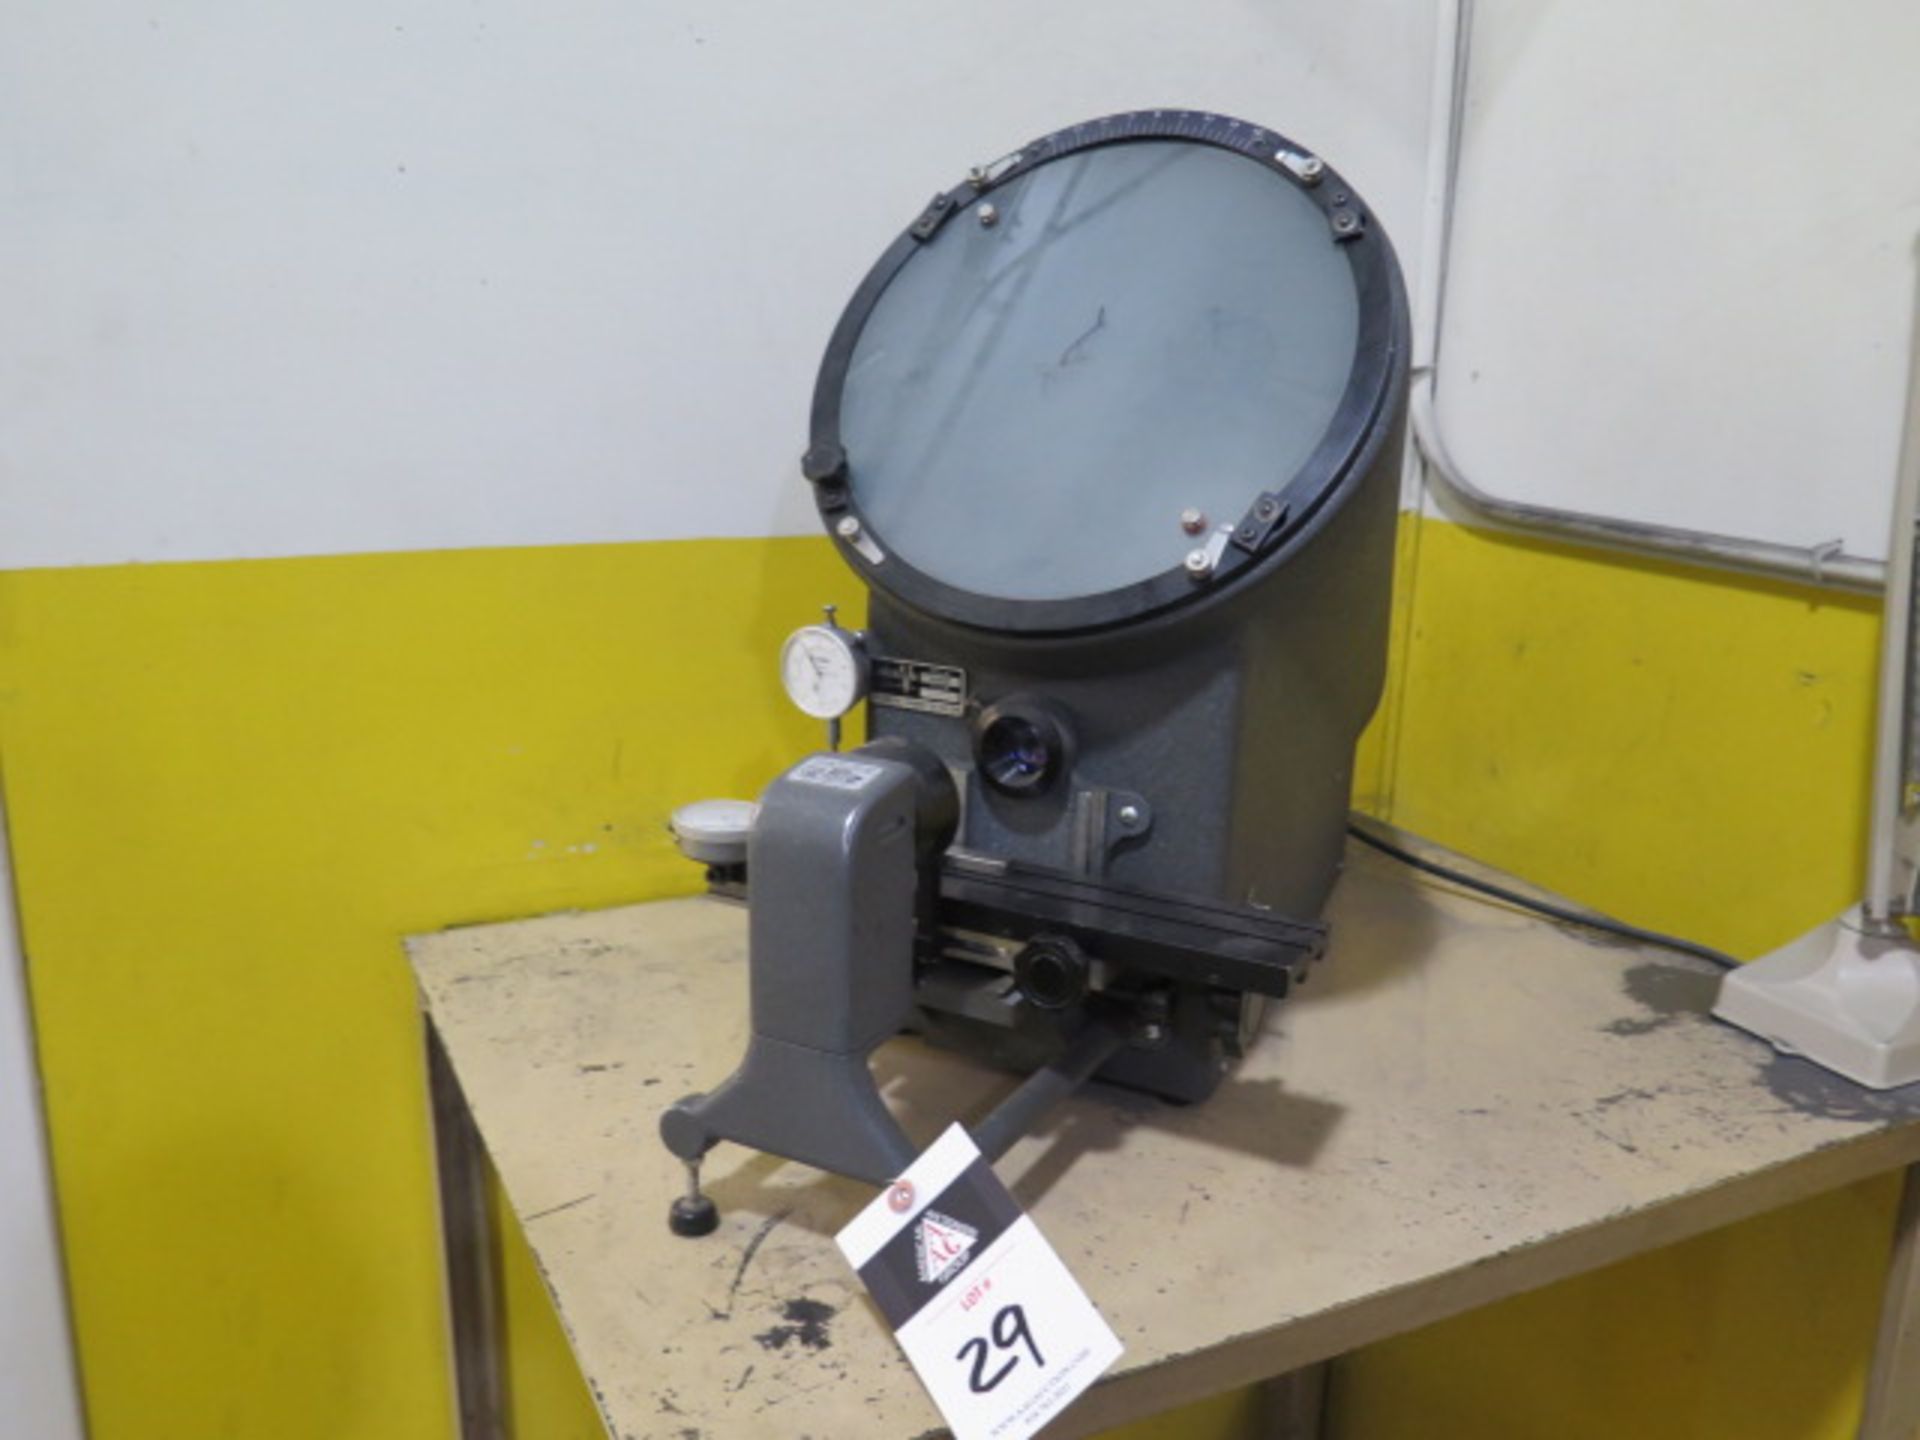 MicroVu 500HP 12” Optical Comparator (SOLD AS-IS - NO WARRANTY)